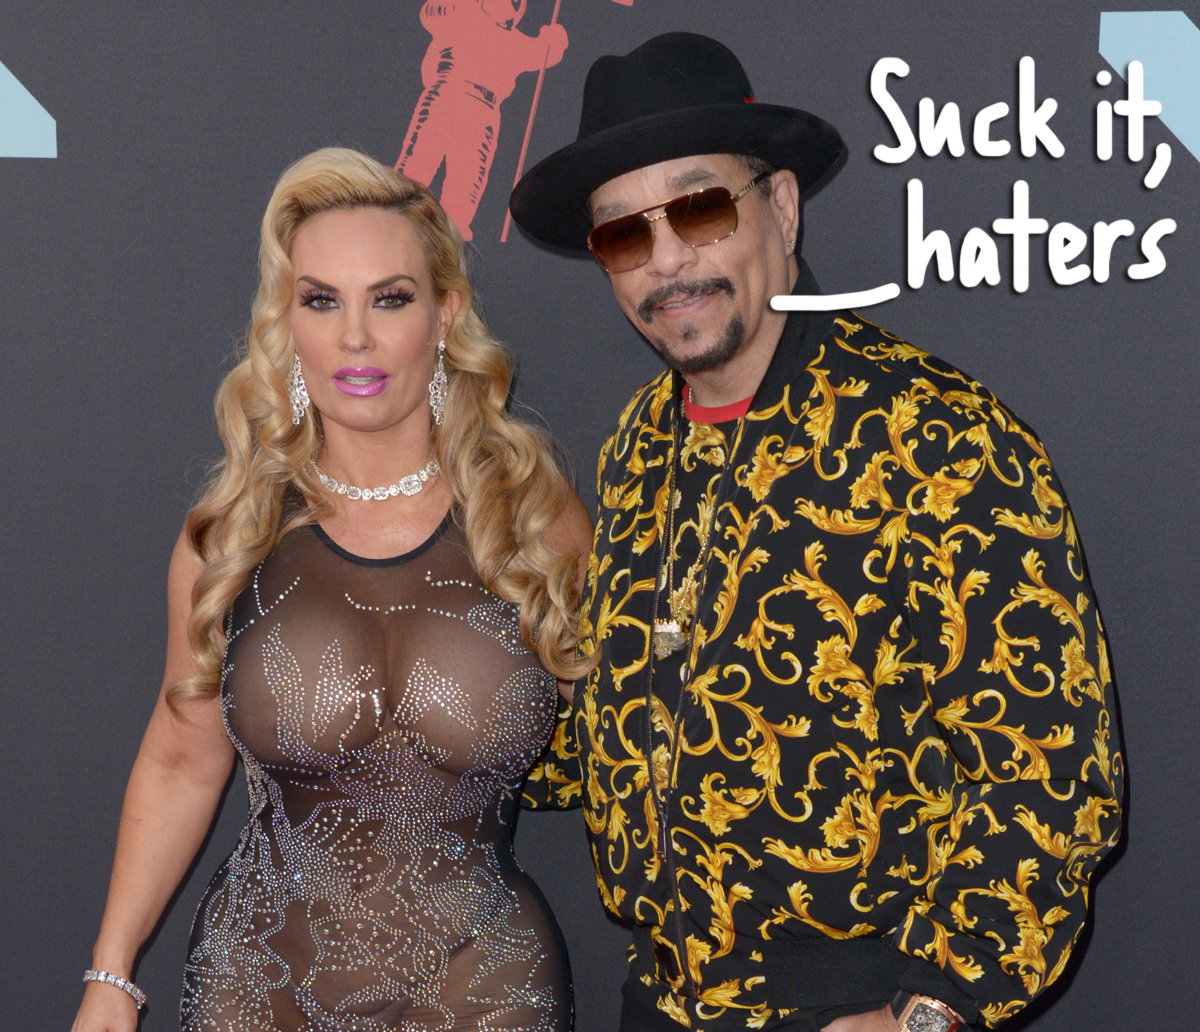 Ice-T Defends Breastfeeding 5-Year-Old Daughter In Most Ice-T Way Possible!  pic